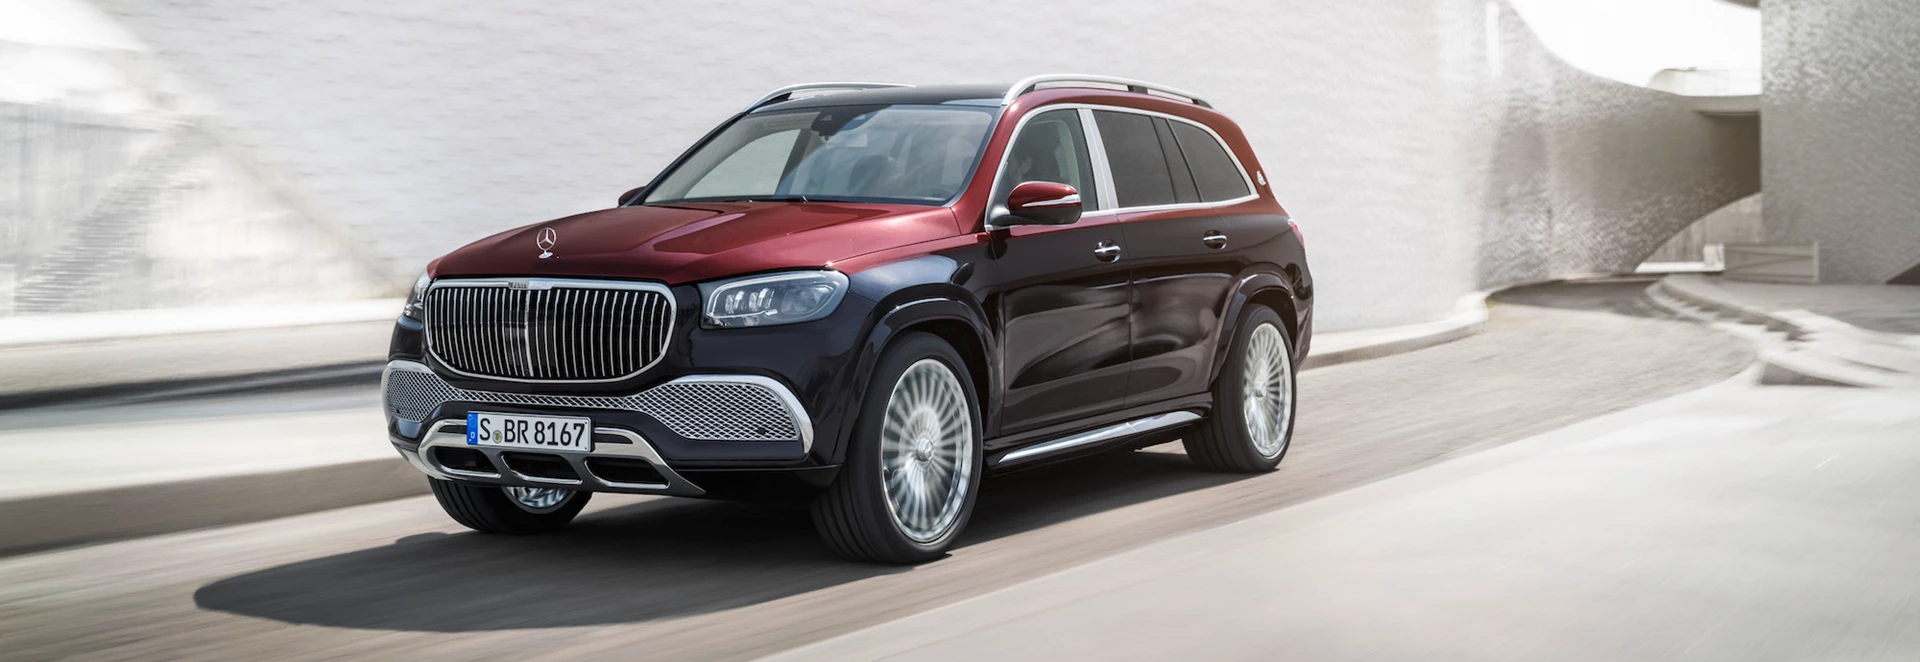 Luxurious Mercedes-Benz Maybach GLS revealed